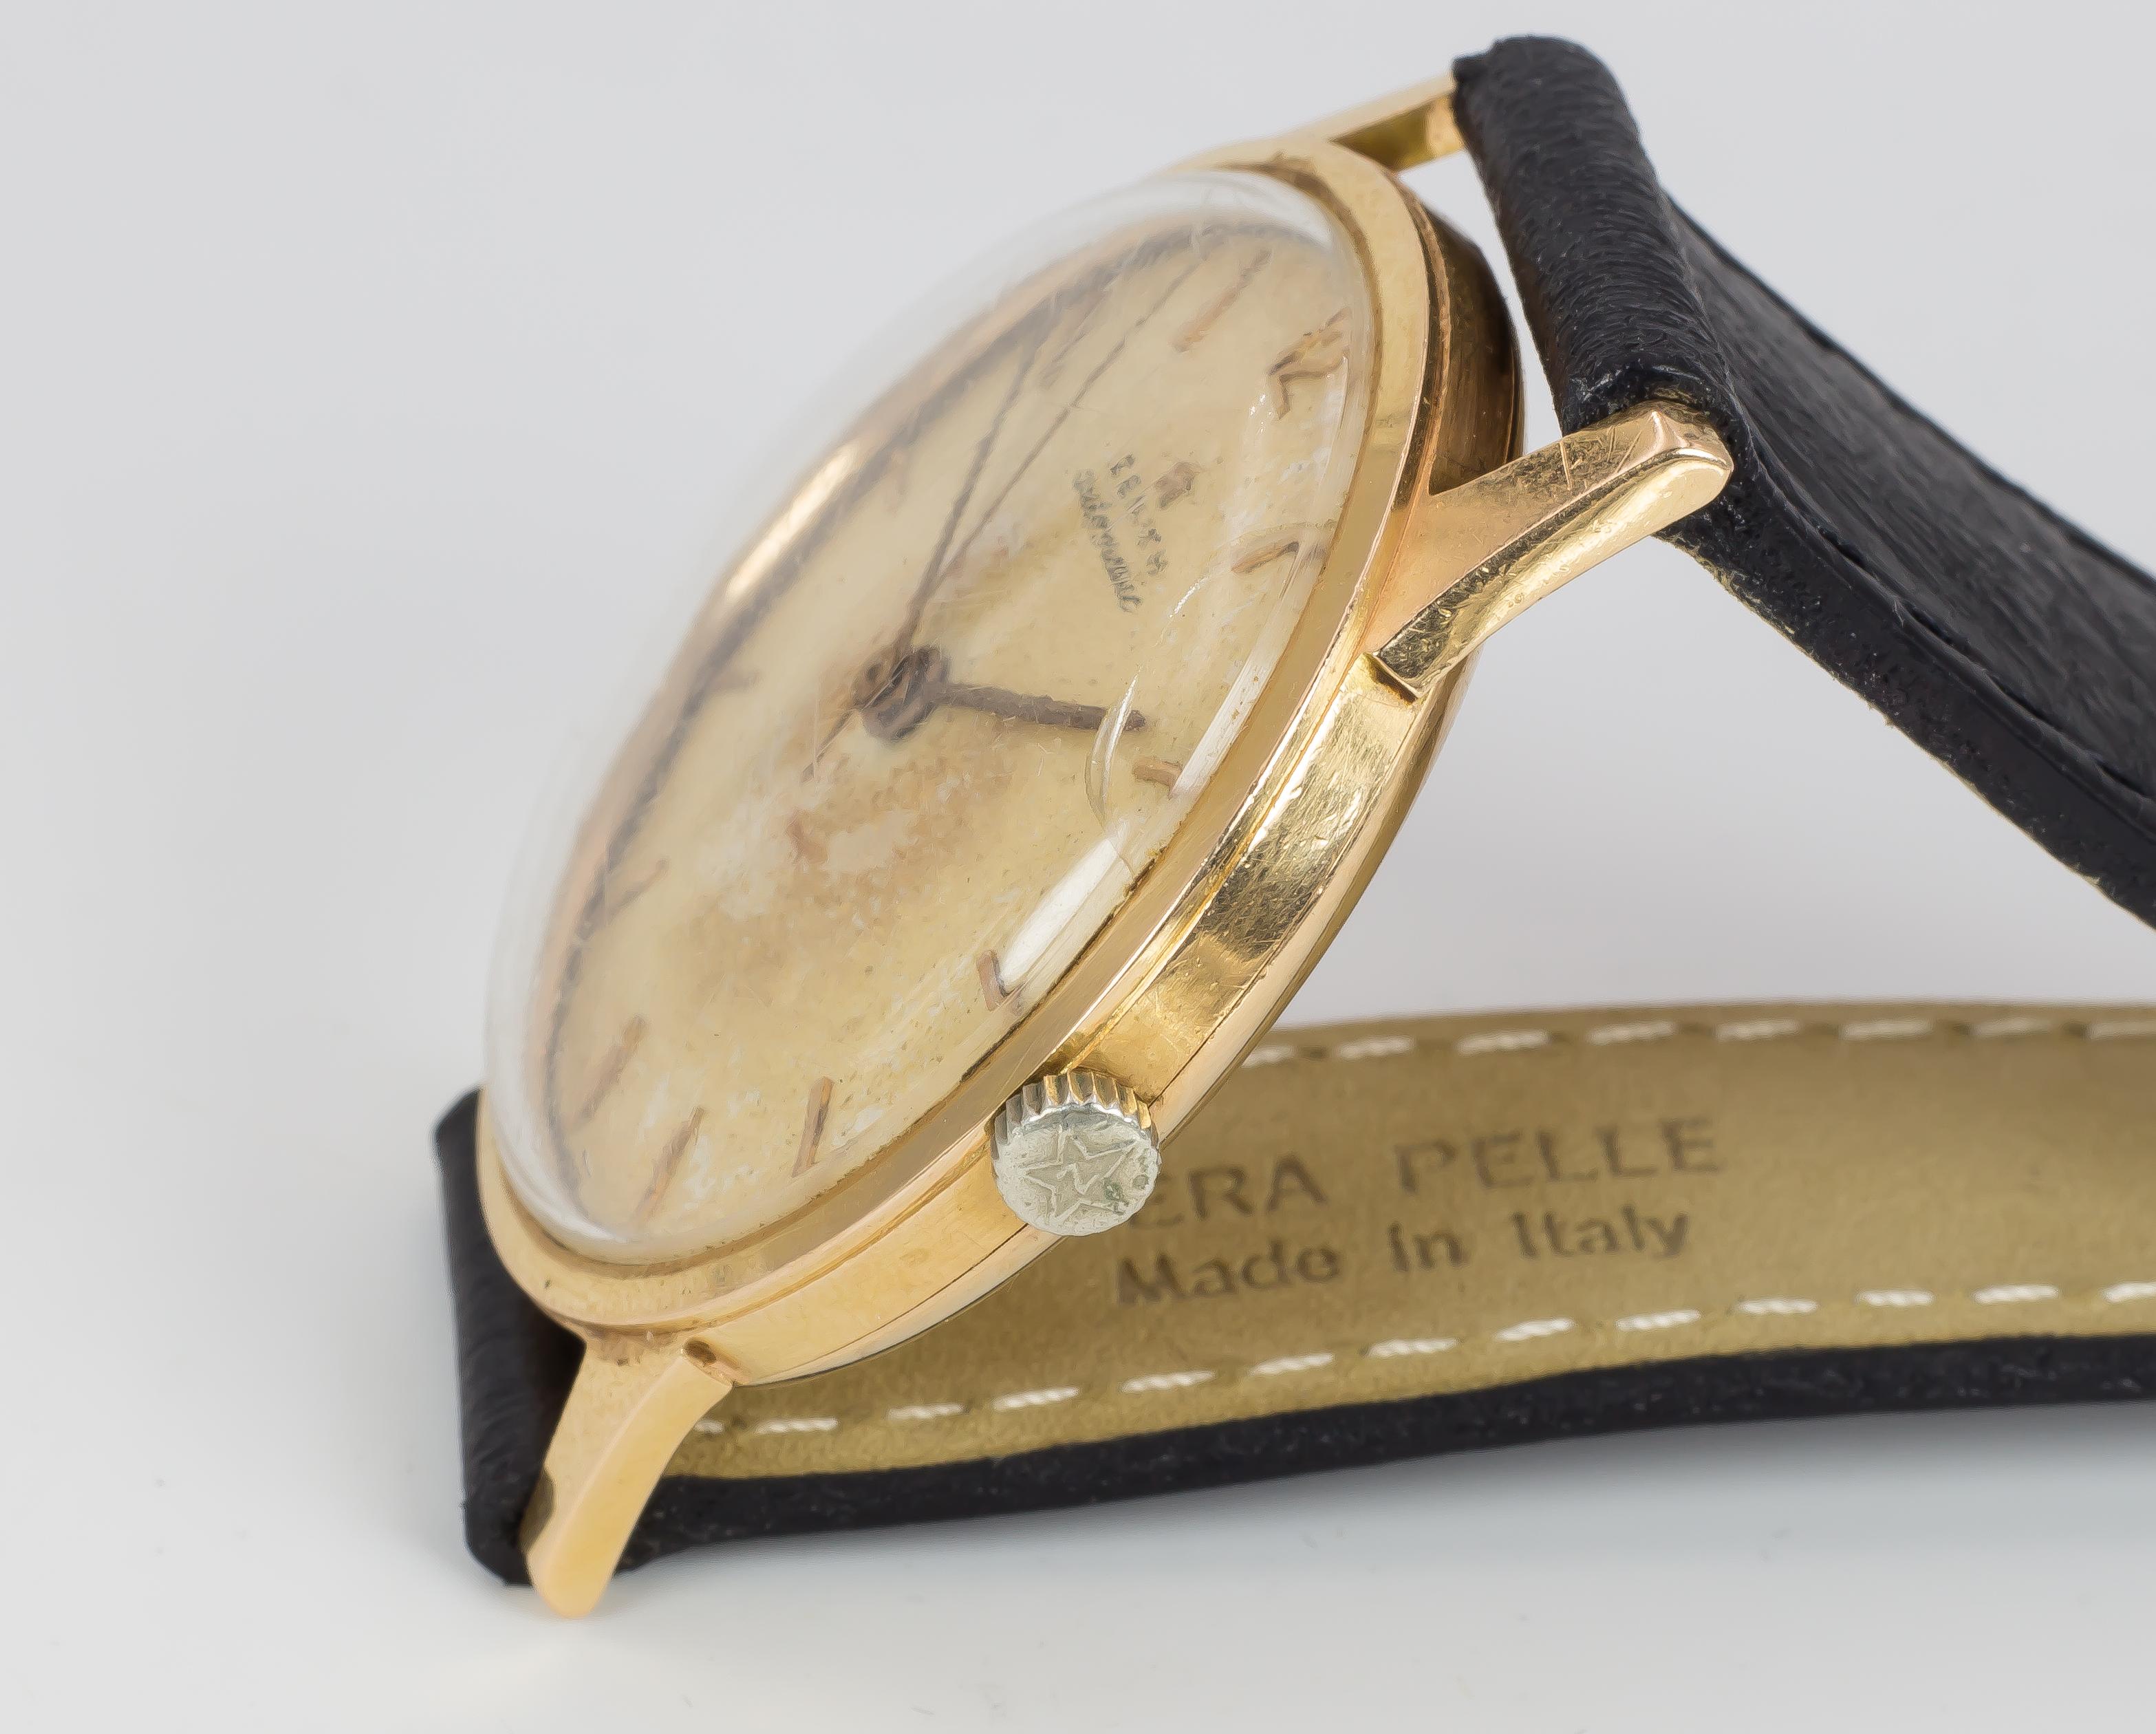 A vintage gold Zenith automatic wrist watch, dating from the 1950s. 

BRAND
Zenith

MATERIALS
Gold

MEASUREMENTS
Diameter: 38 mm